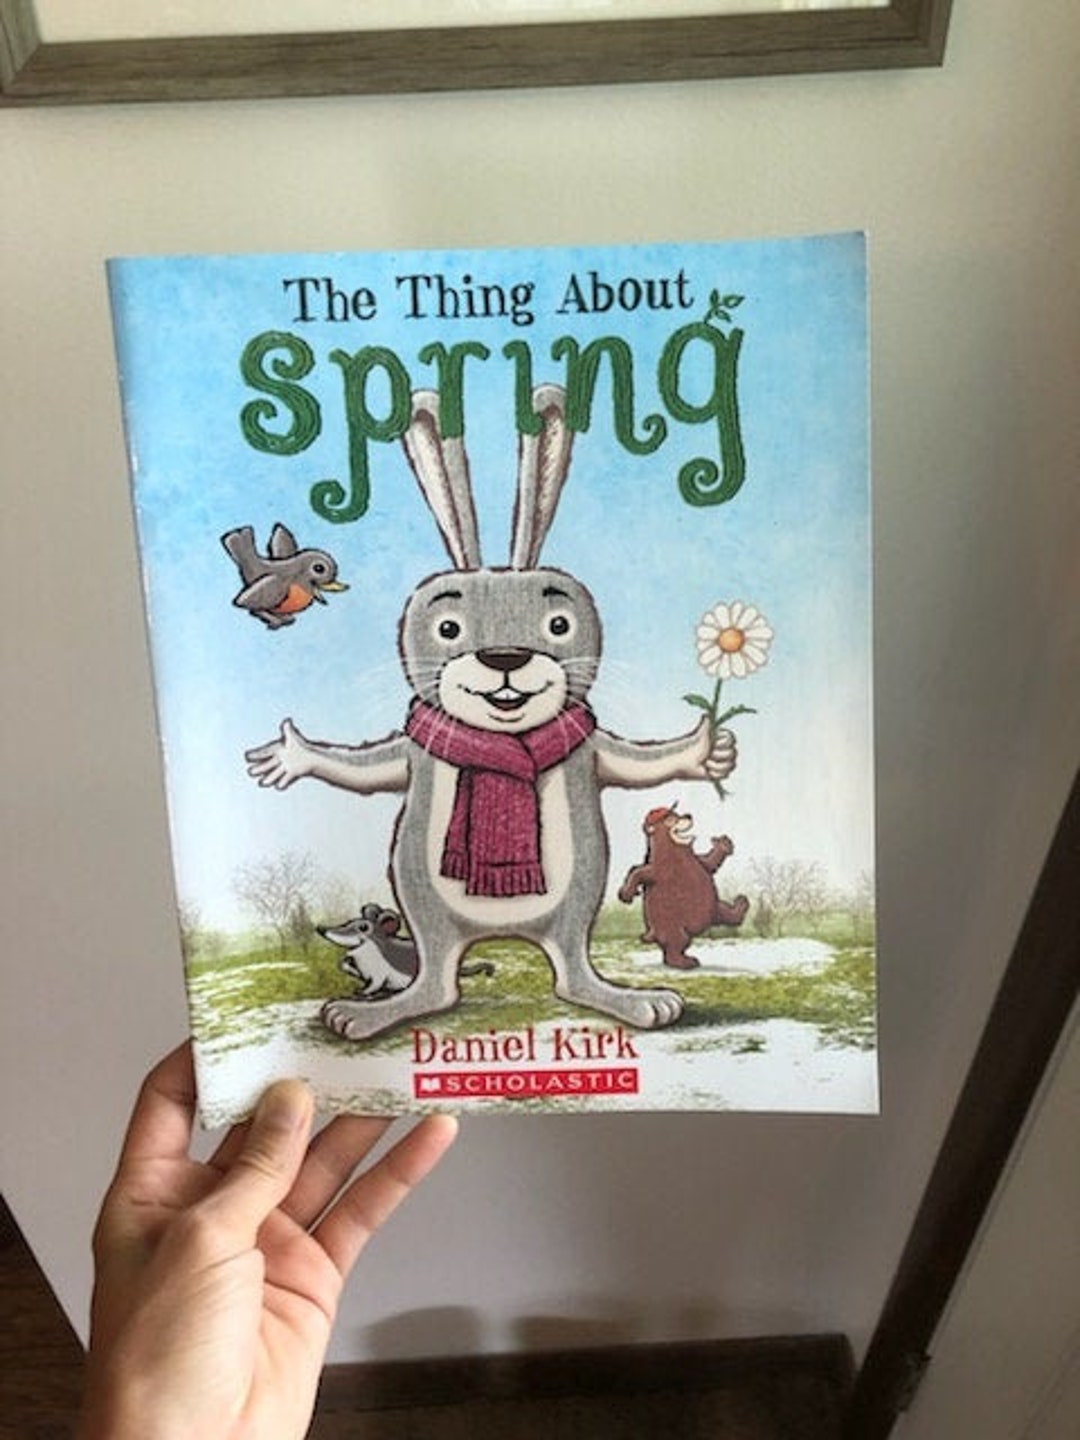 by　Kirk　the　Etsy　Spring　Scholastic　About　Thing　Paperback　Daniel